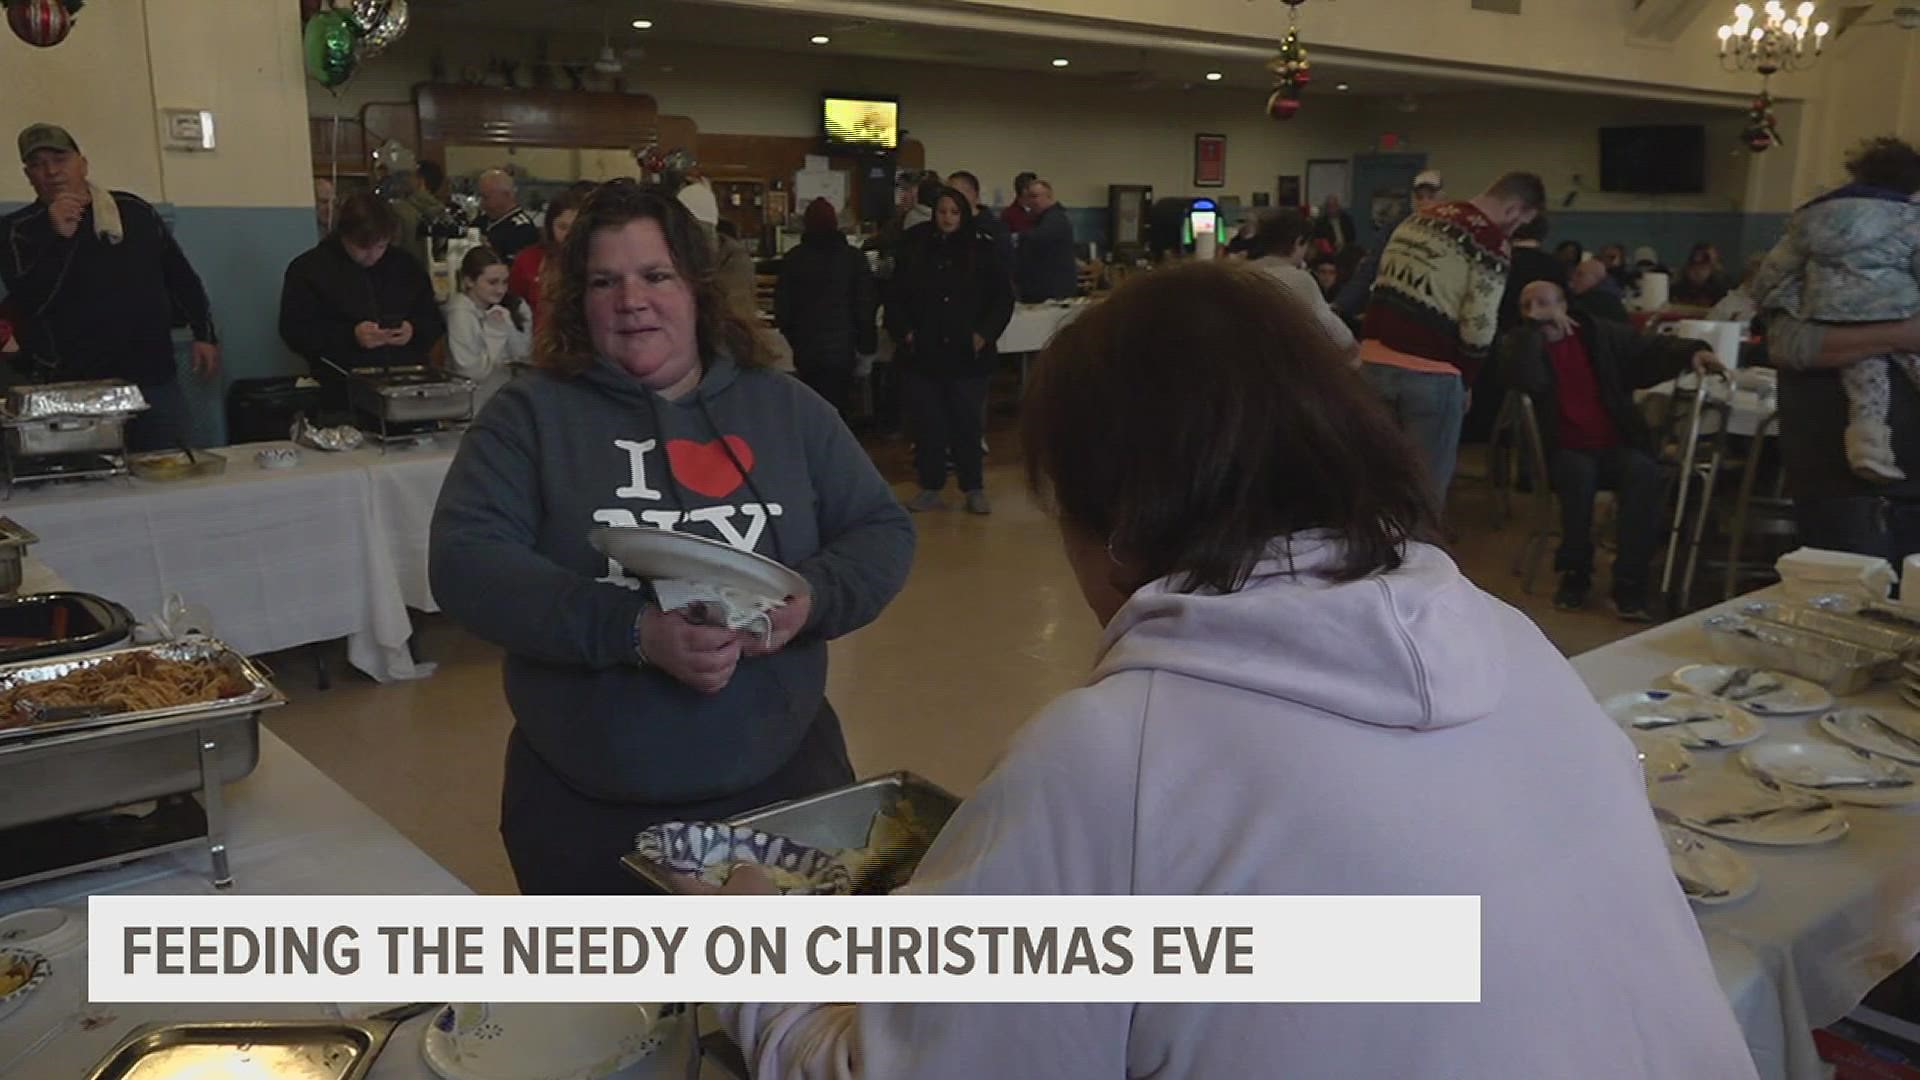 It was a jolly start to the Christmas weekend for dozens of families in York, who sat down for a holiday meal this morning and left with armfuls of gifts.